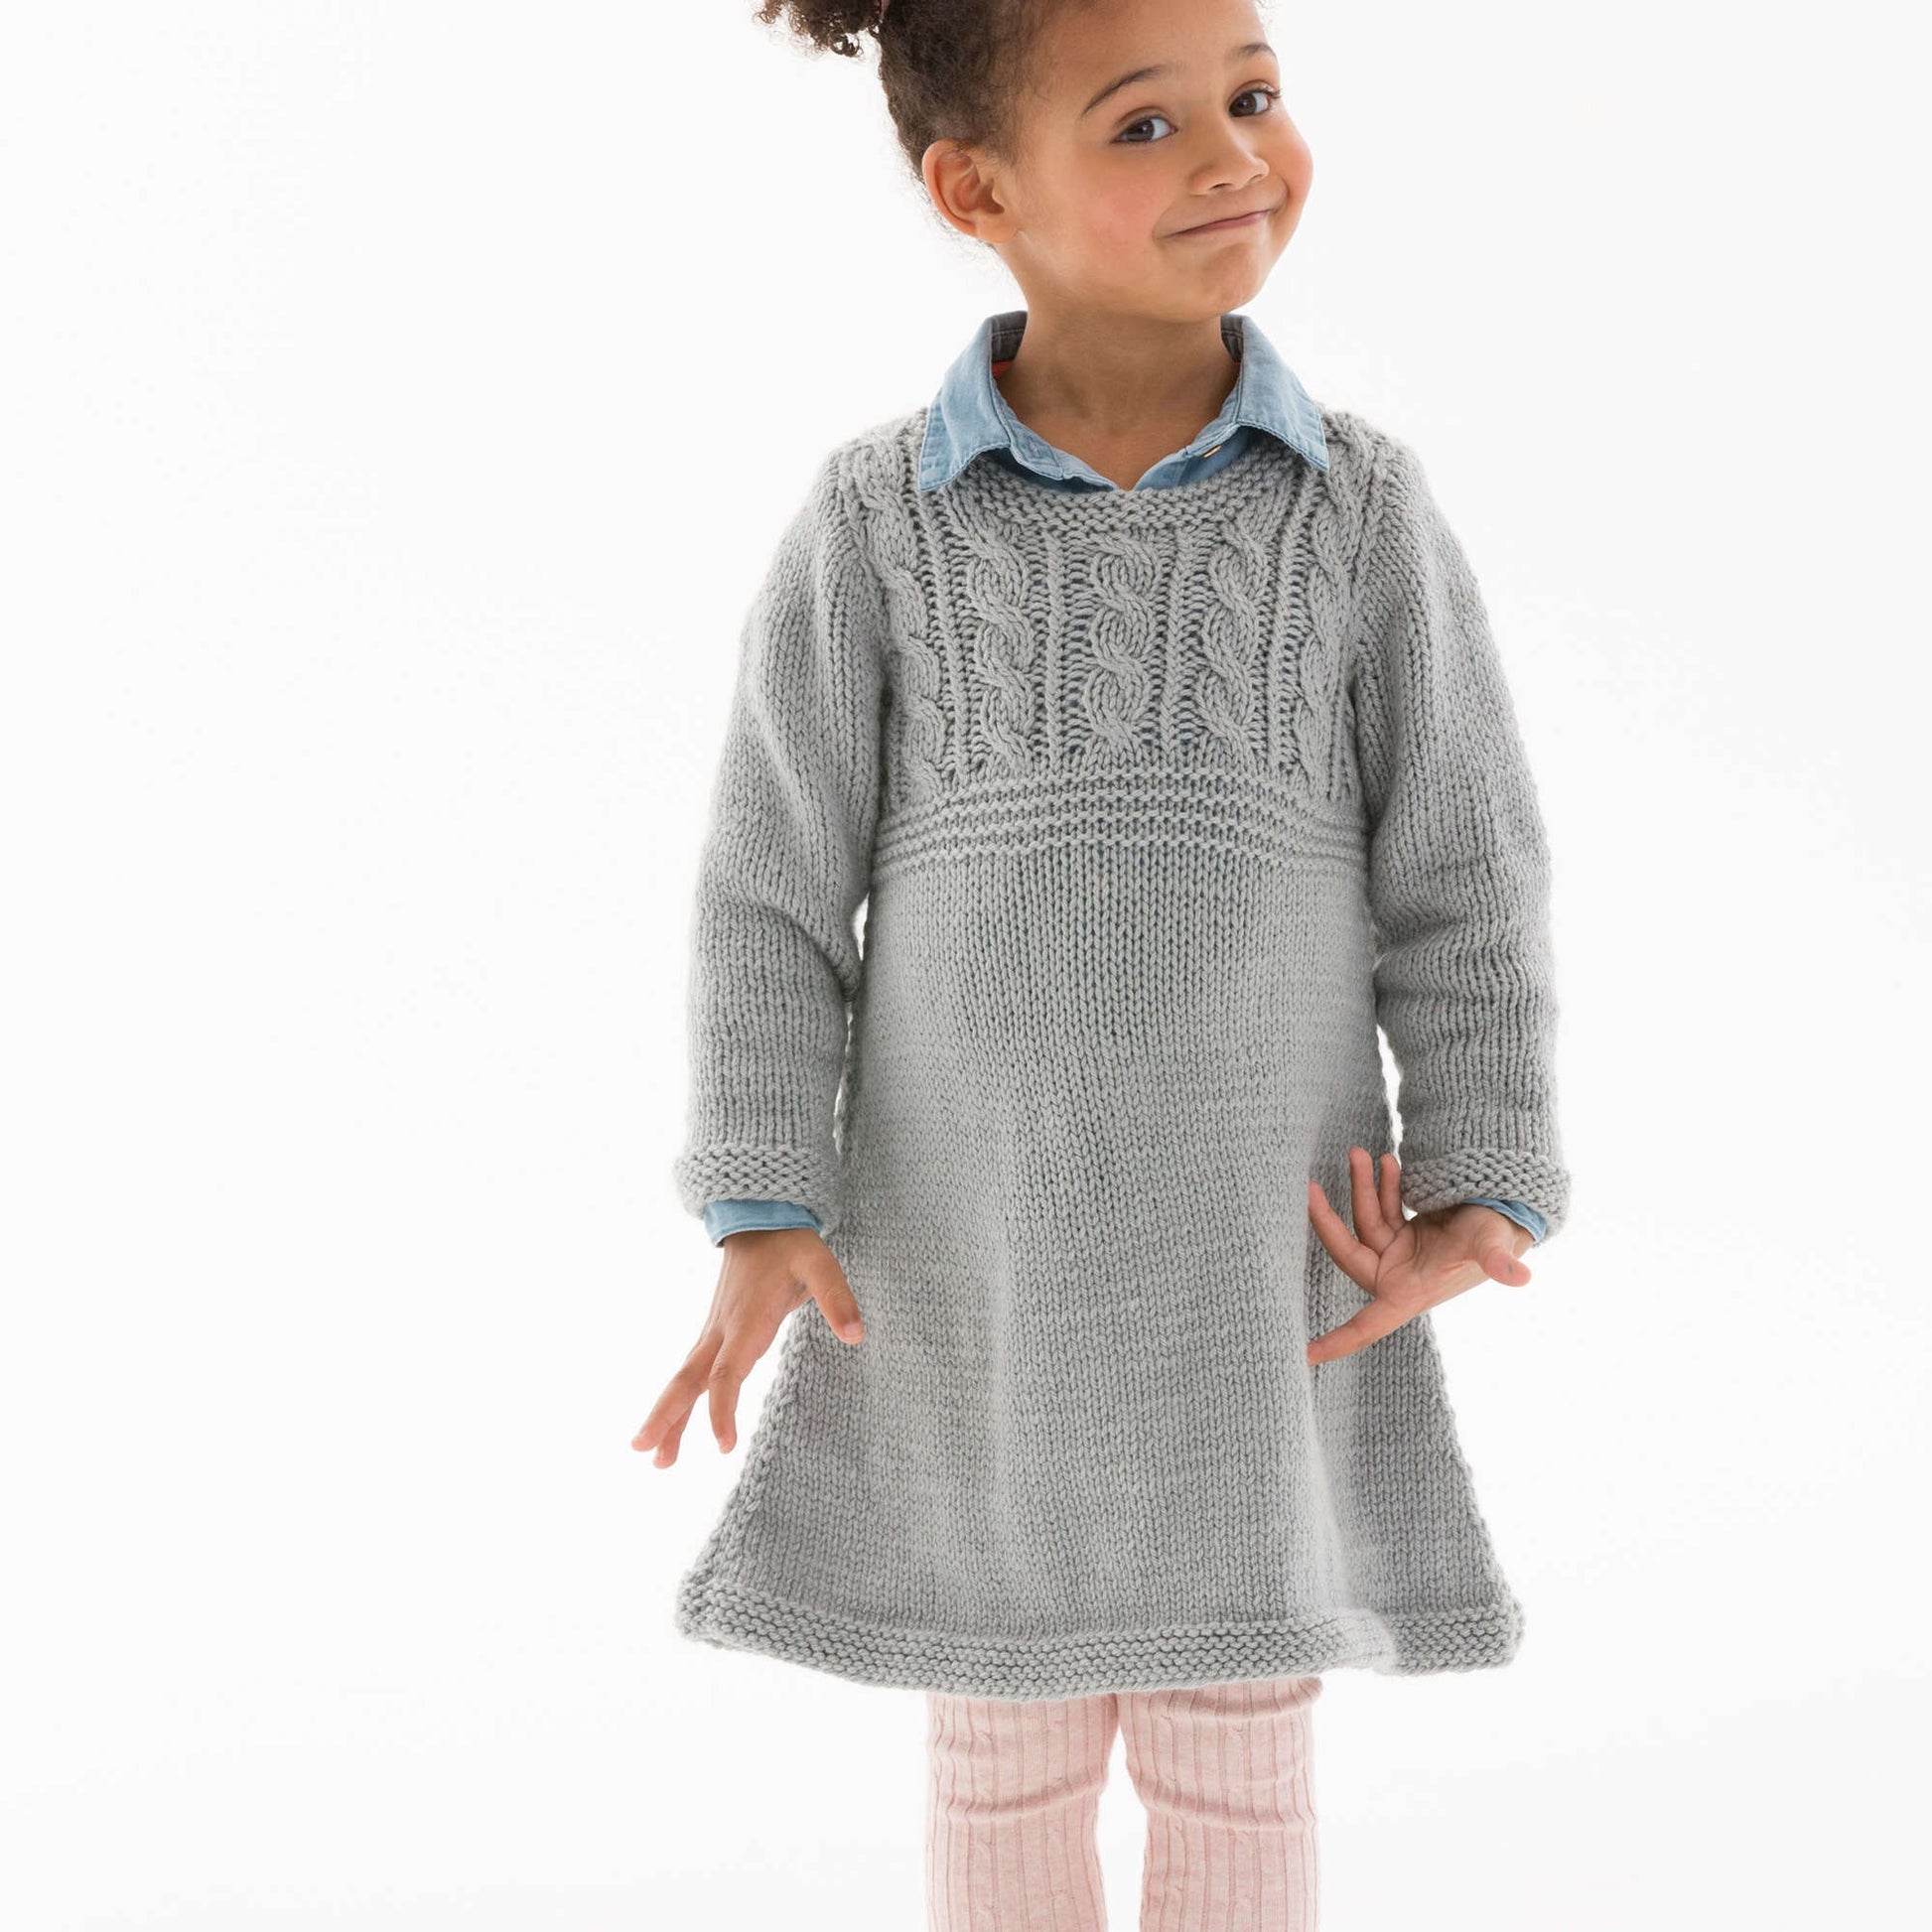 Free Red Heart Cable Sweater Dress Pattern